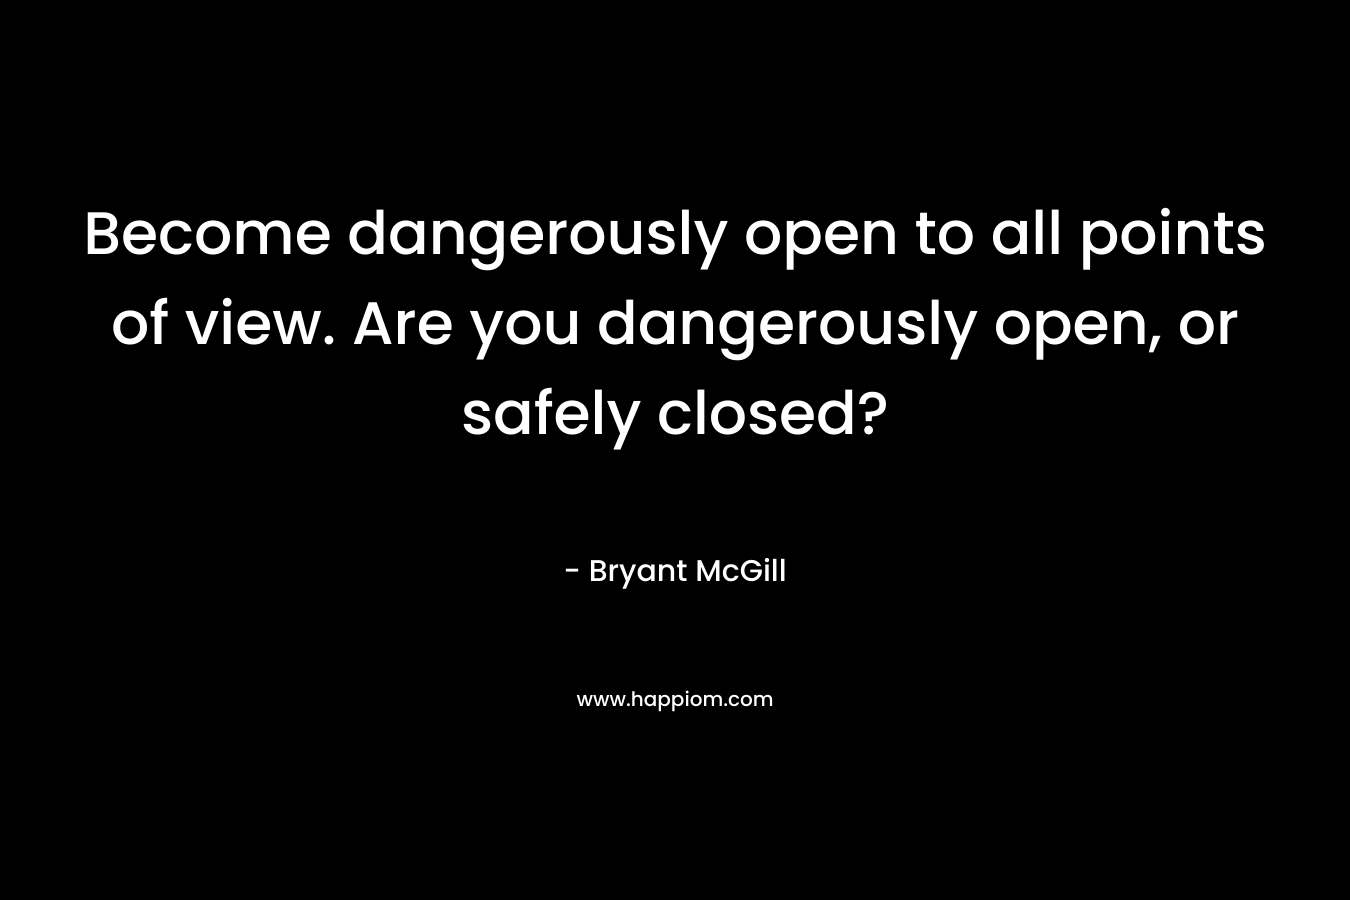 Become dangerously open to all points of view. Are you dangerously open, or safely closed? – Bryant McGill